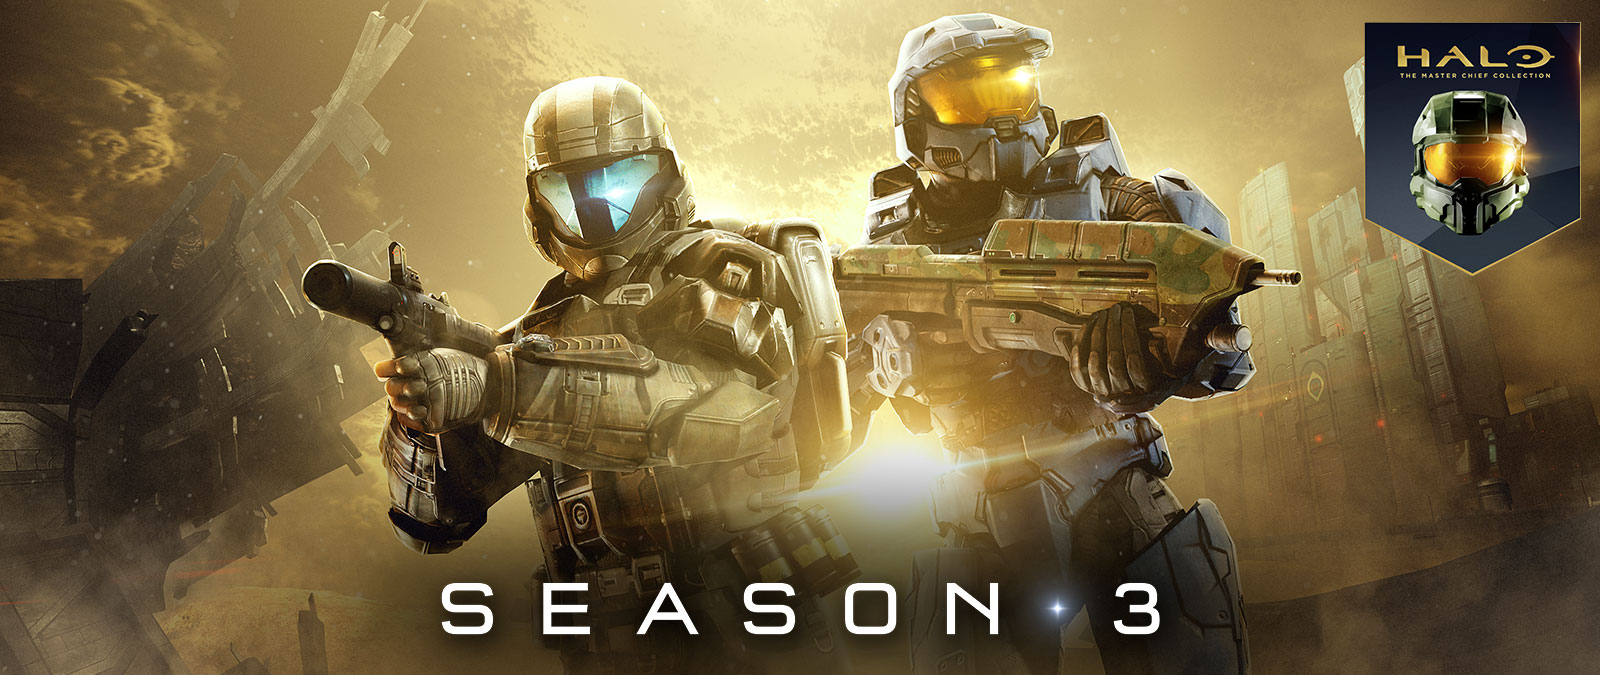 Halo: The Master Chief Collection, Season 3, An Orbital Drop Shock Trooper and Master Chief hold guns ready to fire